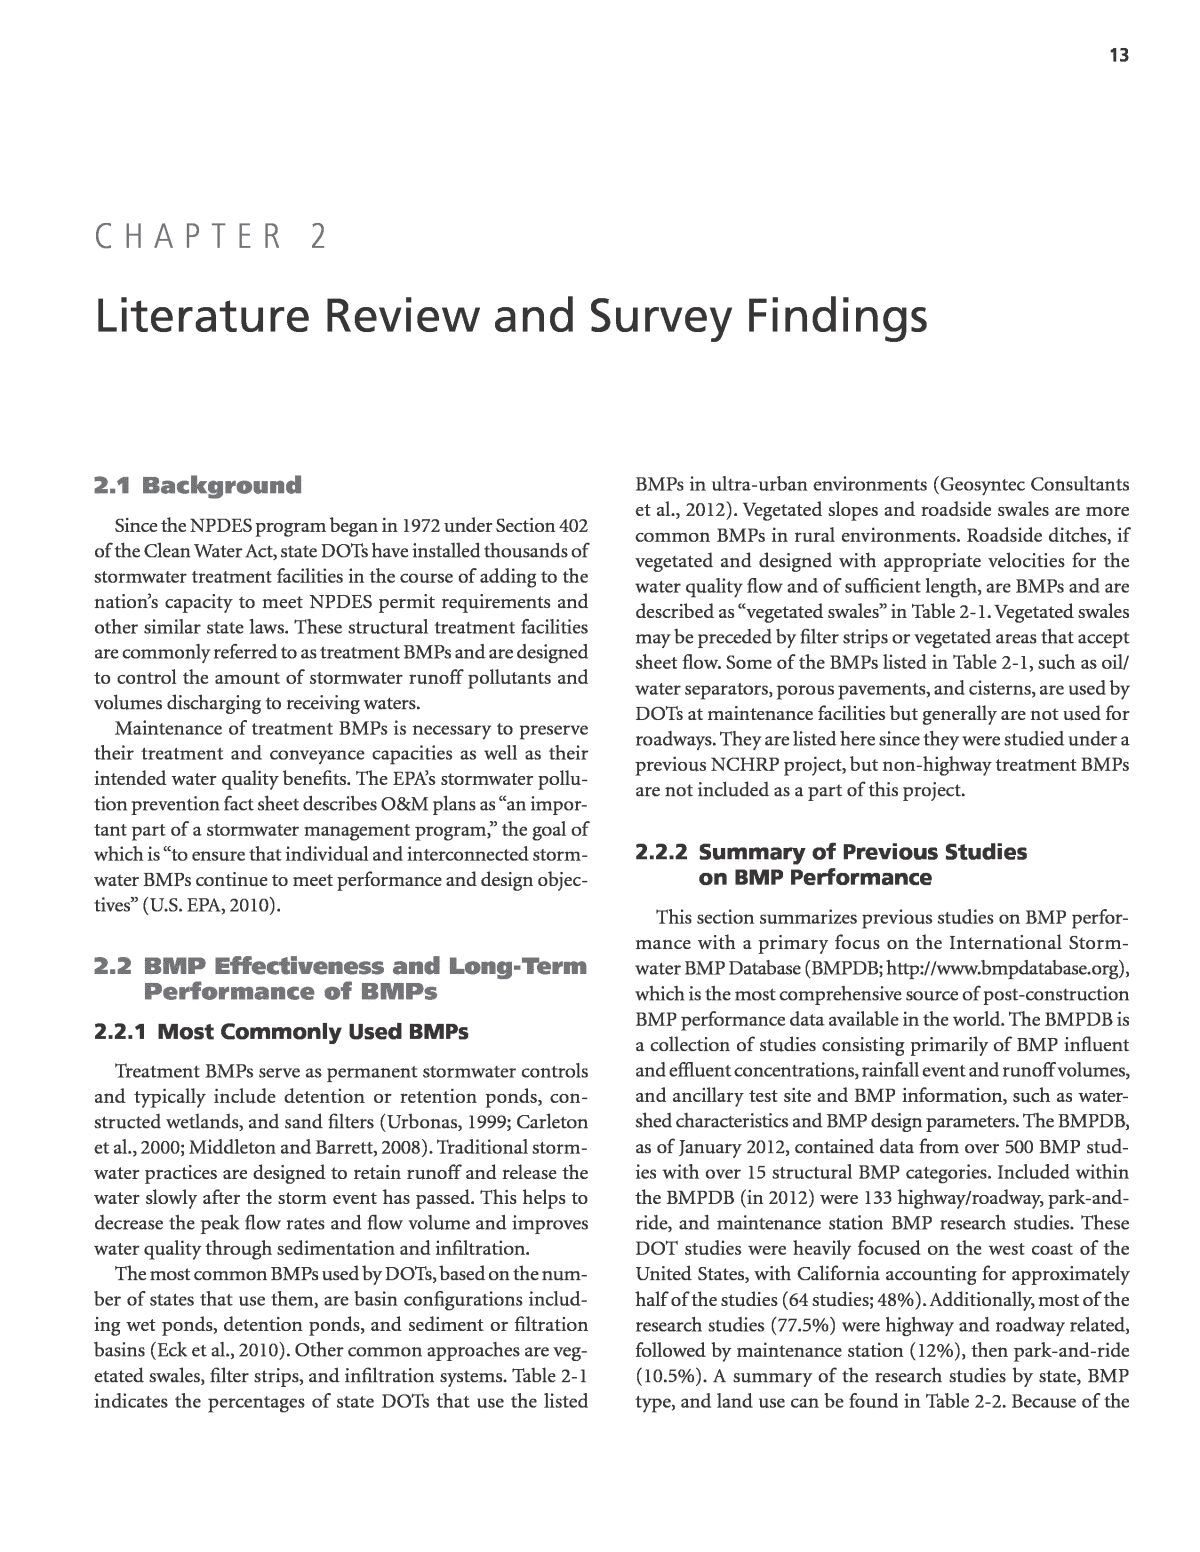 Chapter 2 Review Of Literature